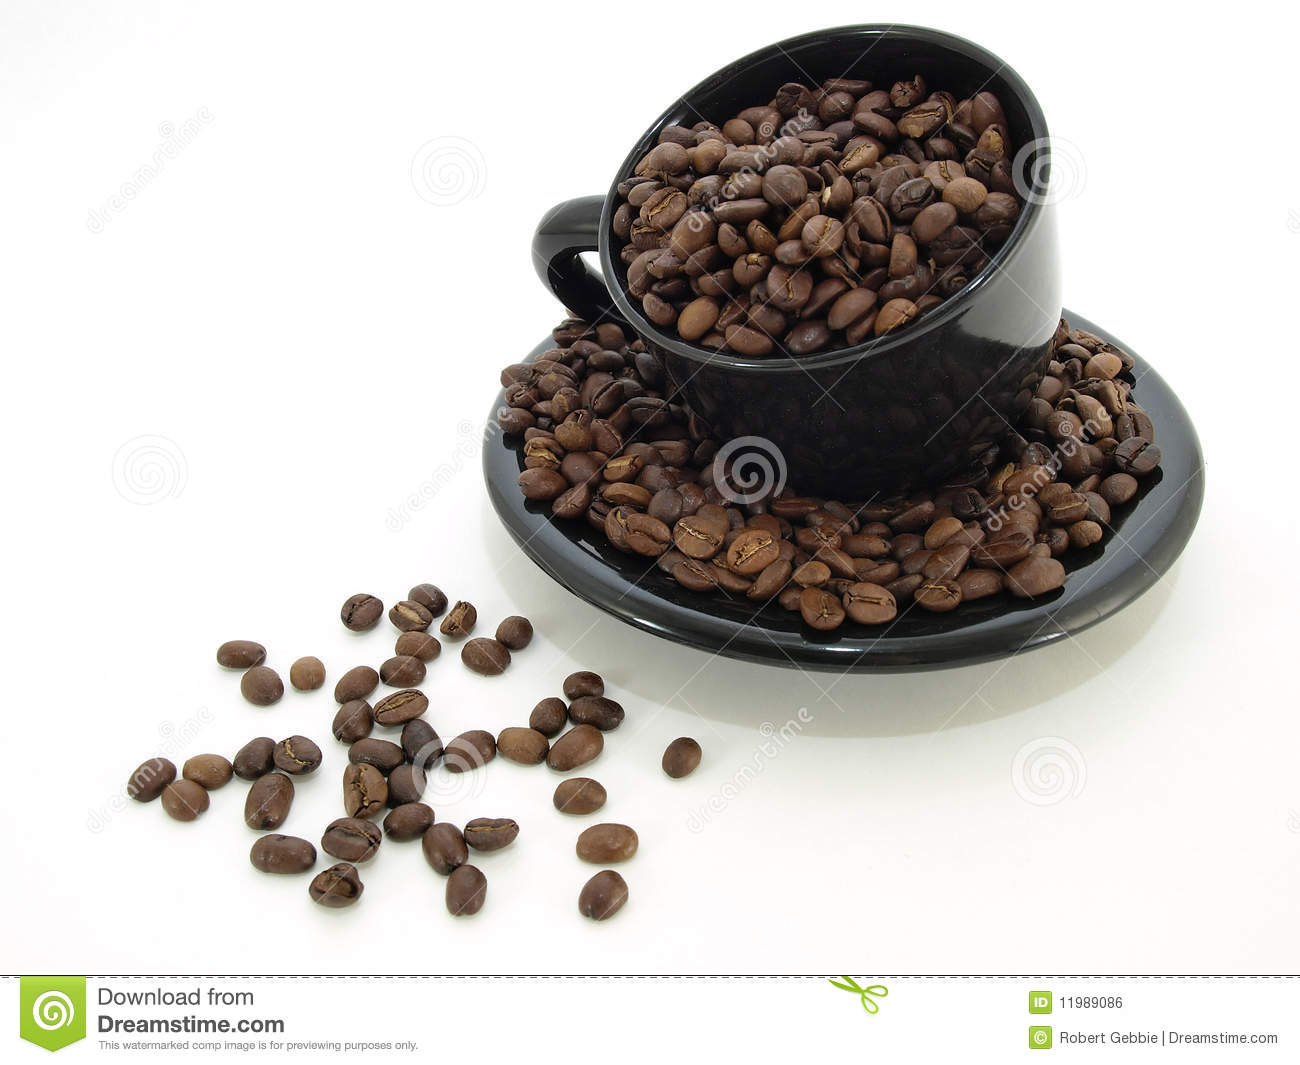 Black Coffee Bean Spill Royalty Free Stock Image   Image  11989086